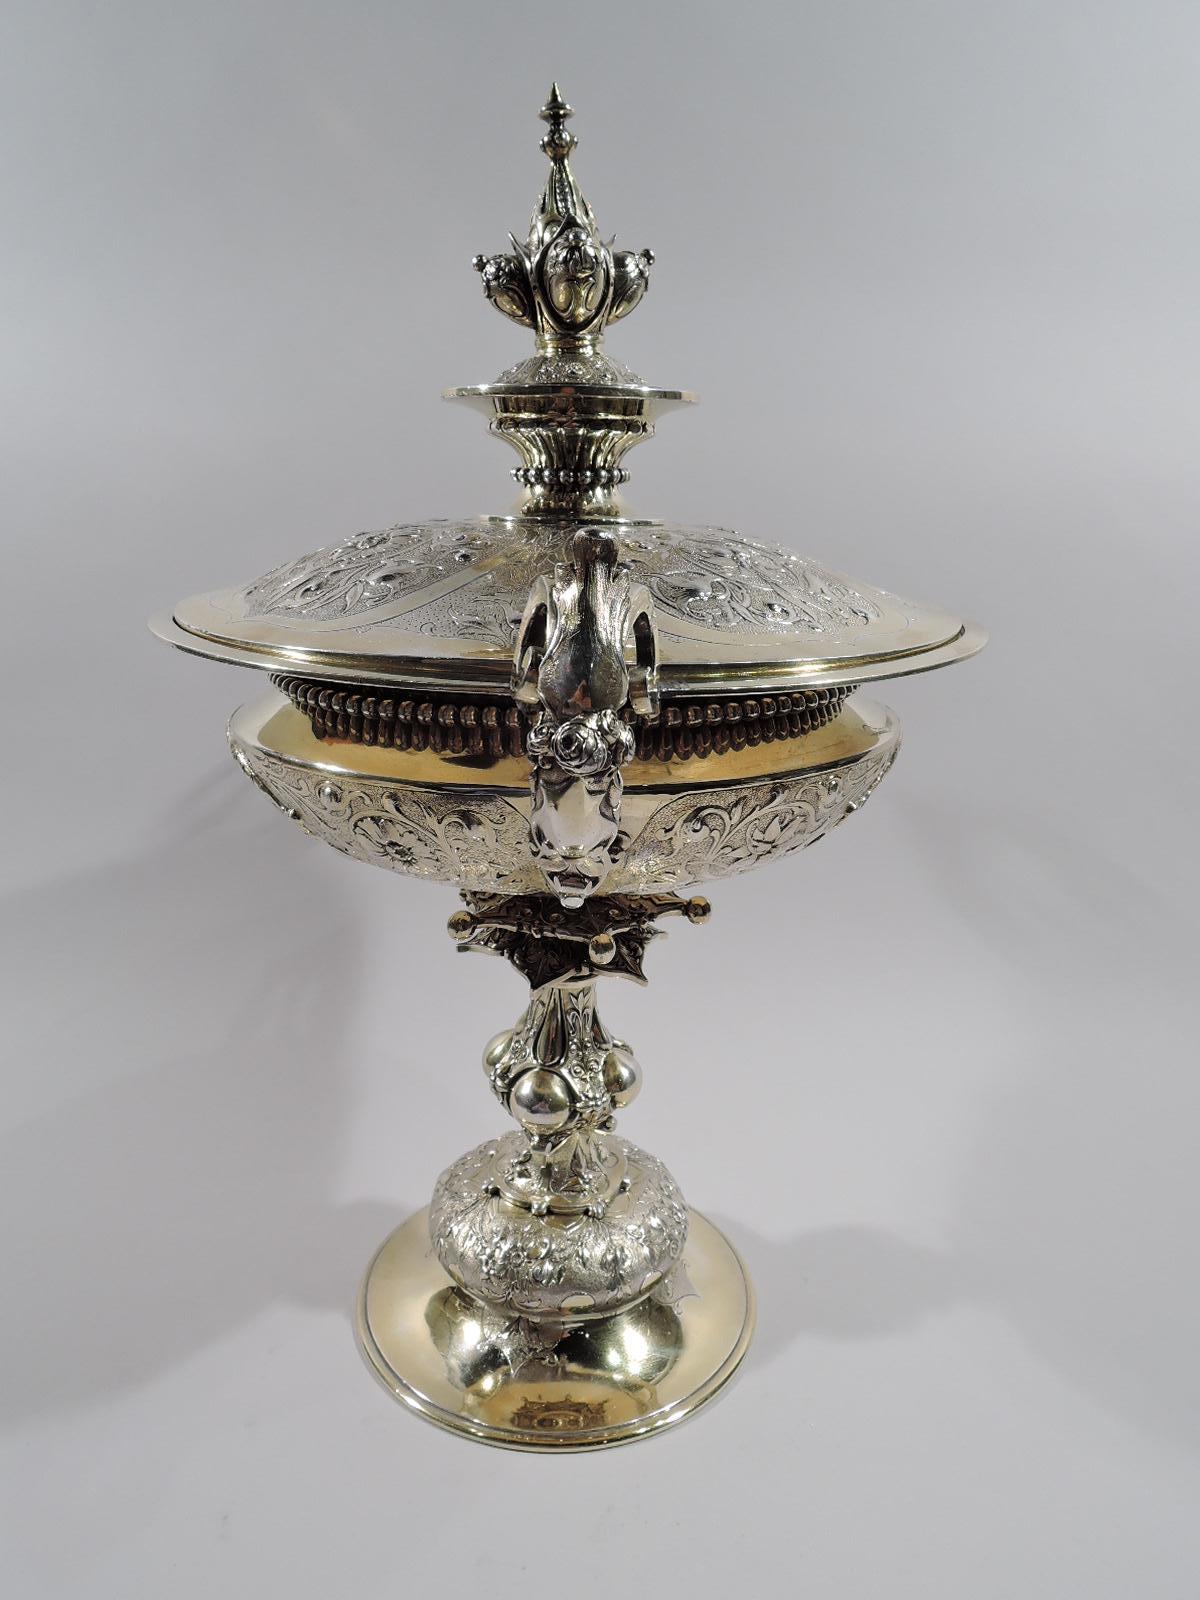 A souvenir of Raj India: English gilt sterling silver covered trophy cup, 1863. Bellied bowl with leaf-mounted and capped C-scroll handles with split C-scroll mounts. Baluster shaft with two star-flanges on dome with chased naturalistic flowers in